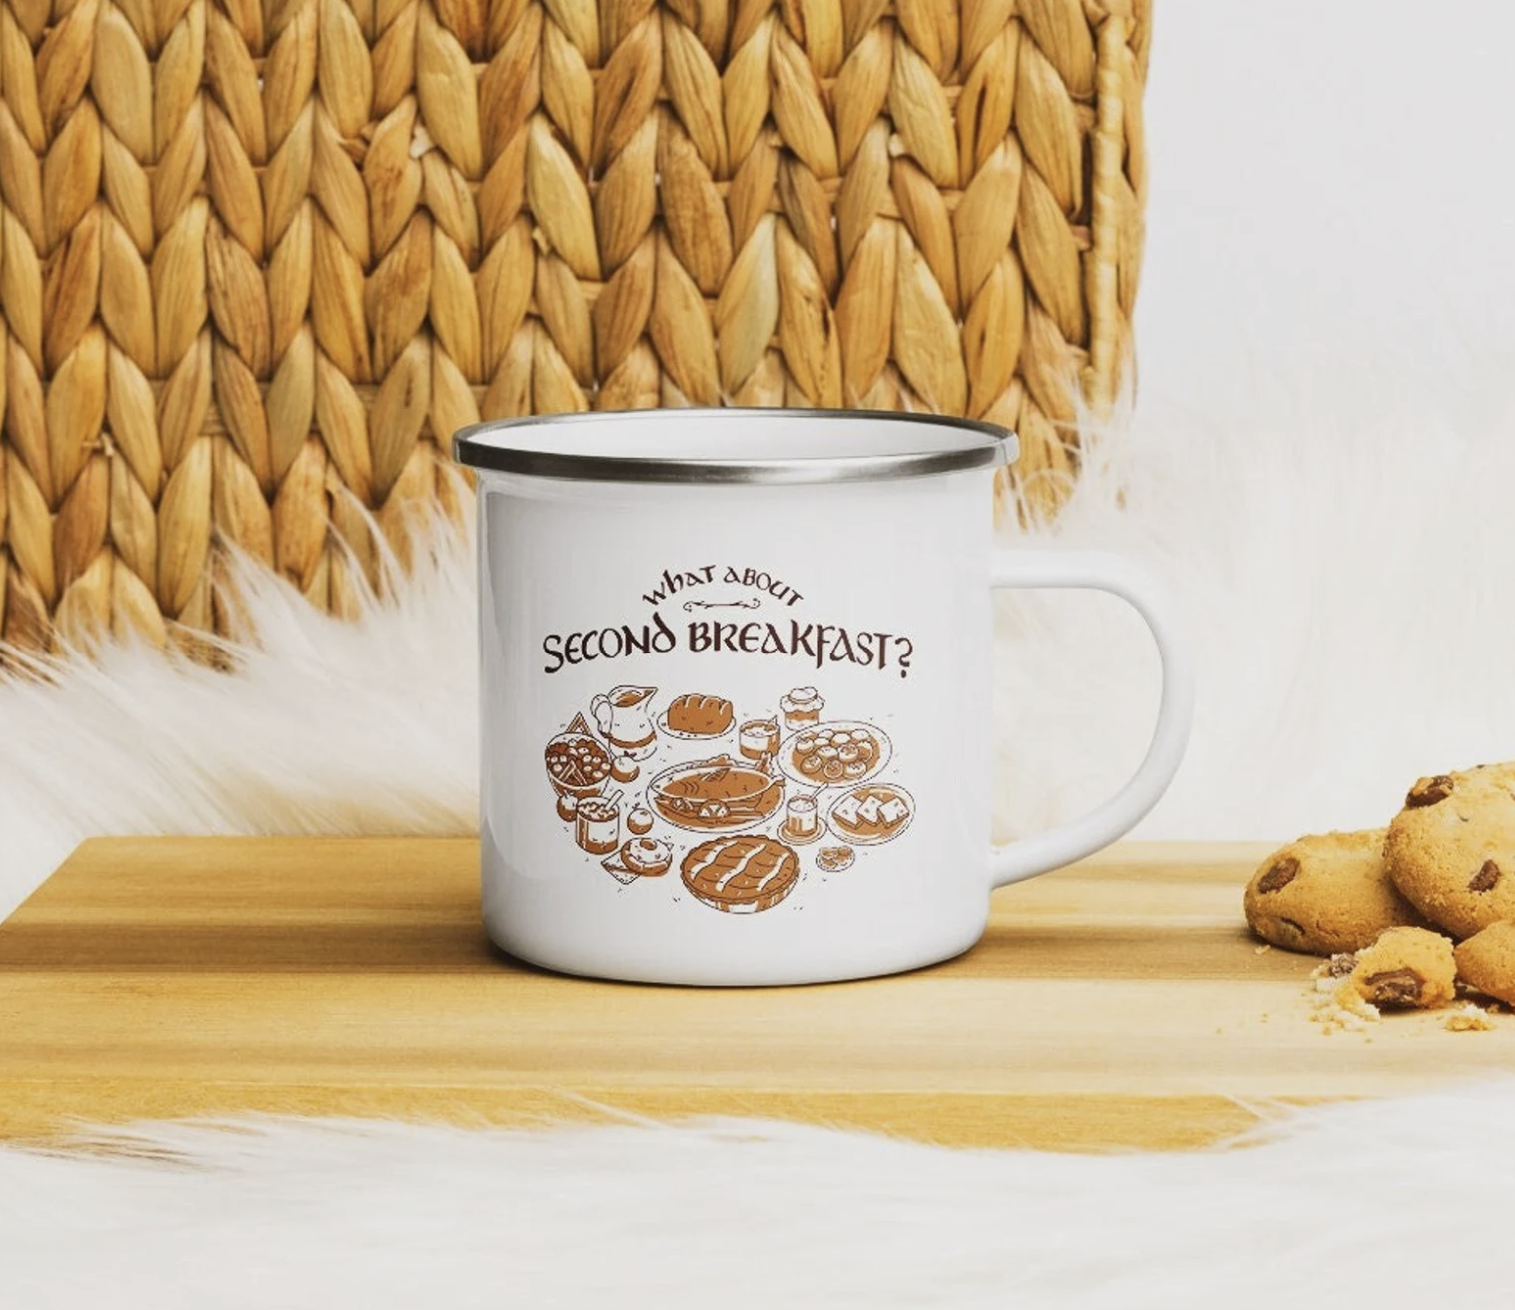 White camp mug with illustrations of a tasty hobbit breakfast  and the text "what about second breakfast?"